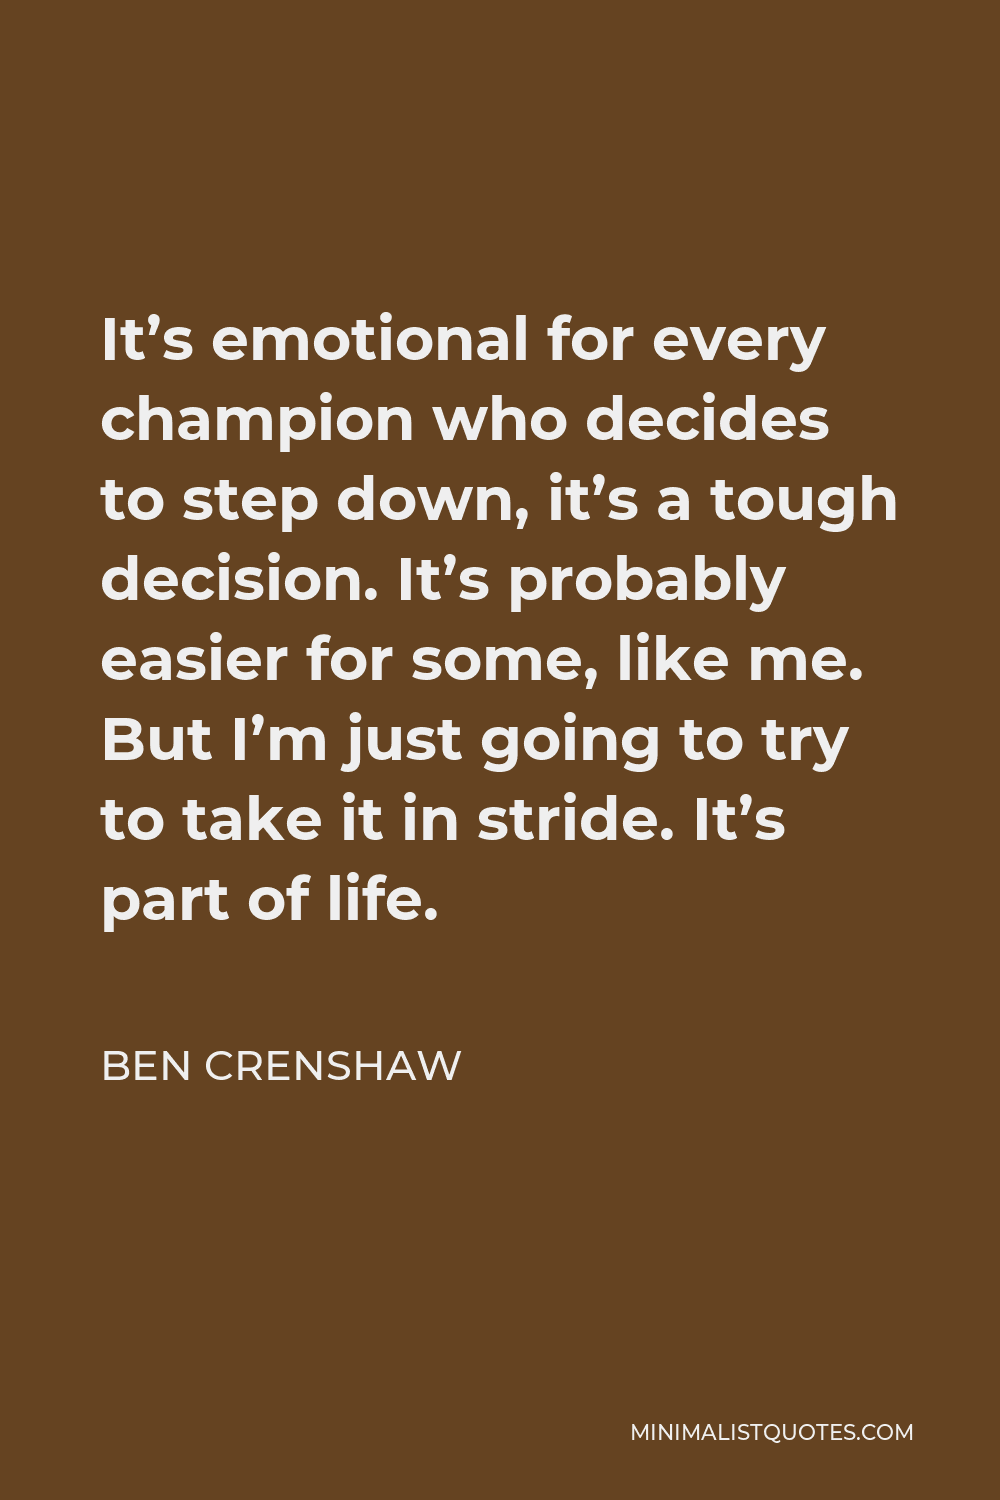 Ben Crenshaw Quote - It’s emotional for every champion who decides to step down, it’s a tough decision. It’s probably easier for some, like me. But I’m just going to try to take it in stride. It’s part of life.